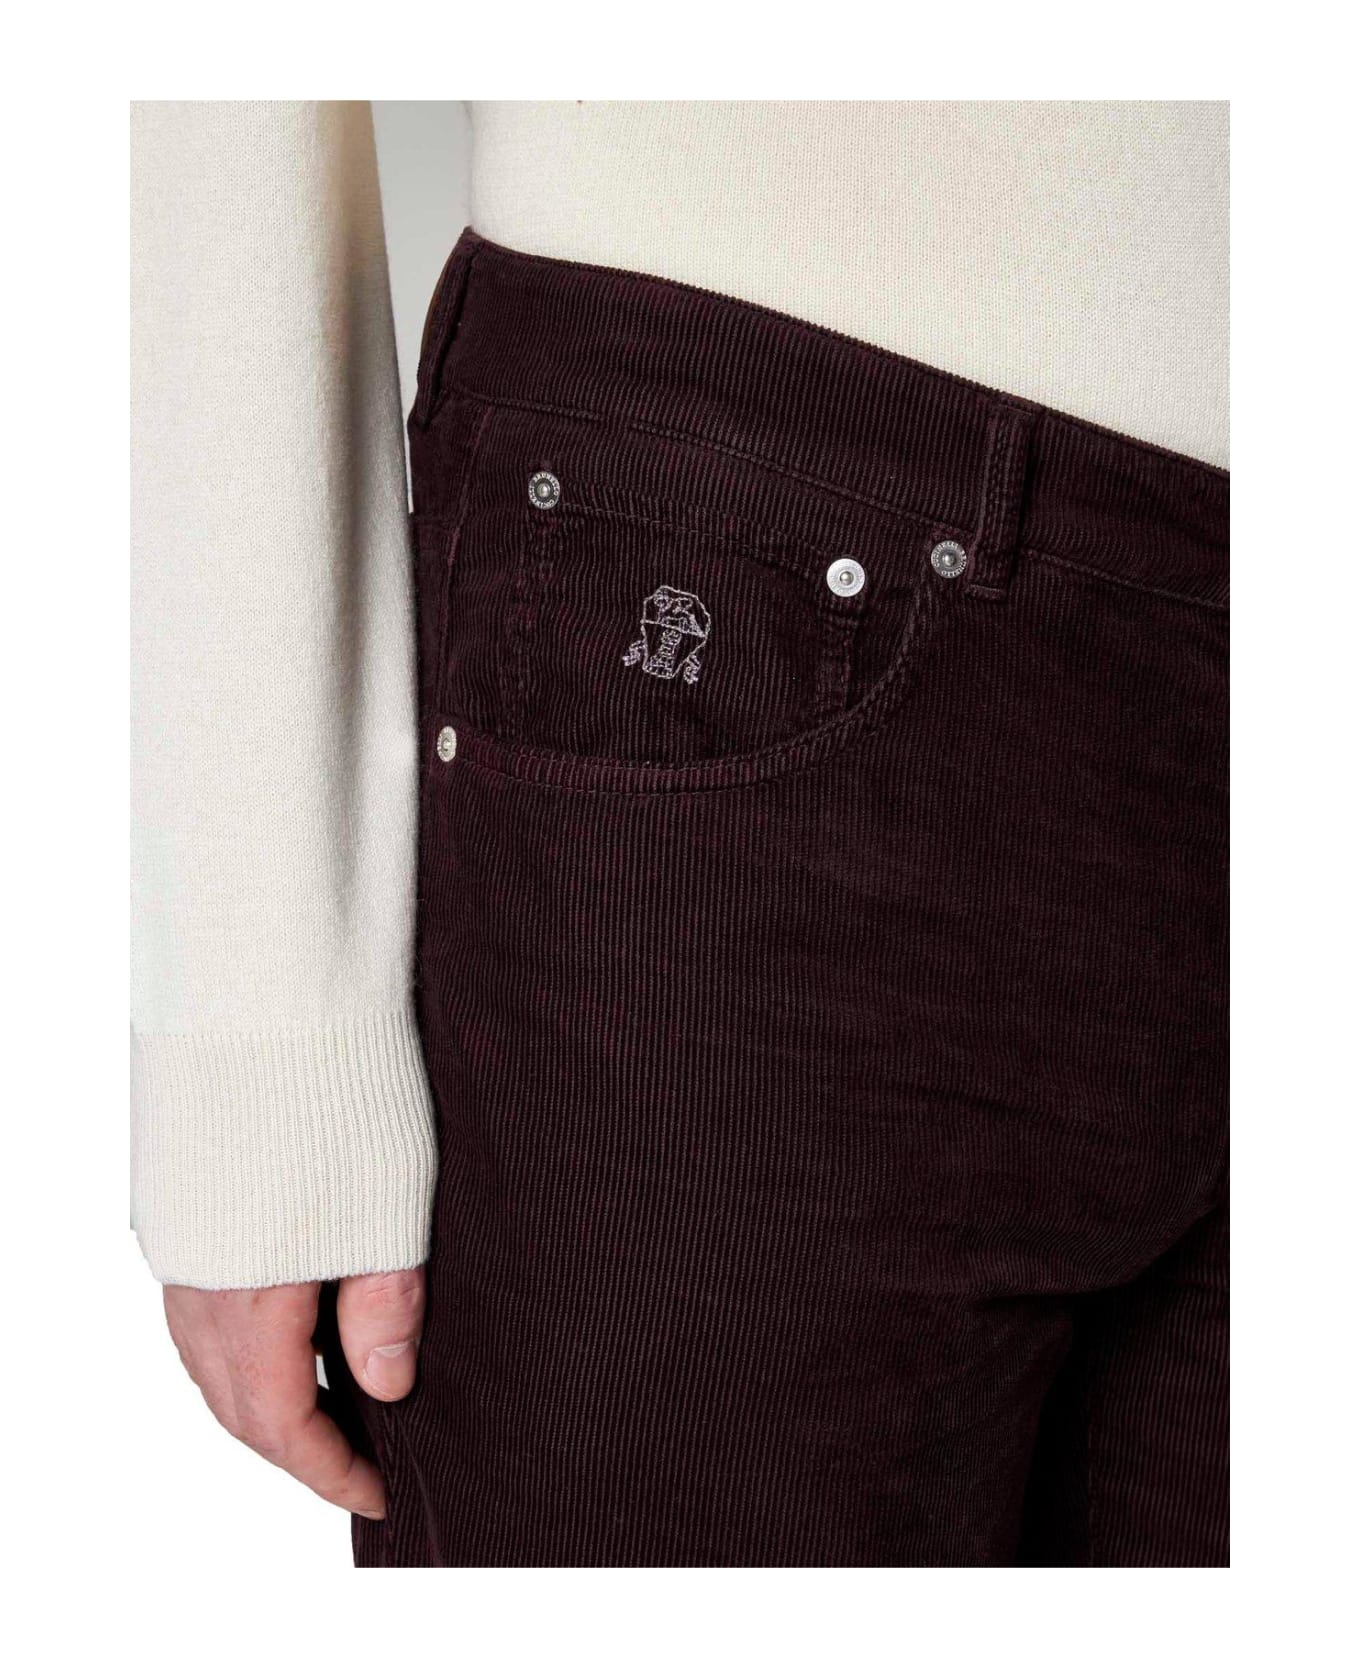 Brunello Cucinelli Logo Embroidered Cropped Corduroy Pants - Bordeaux ボトムス